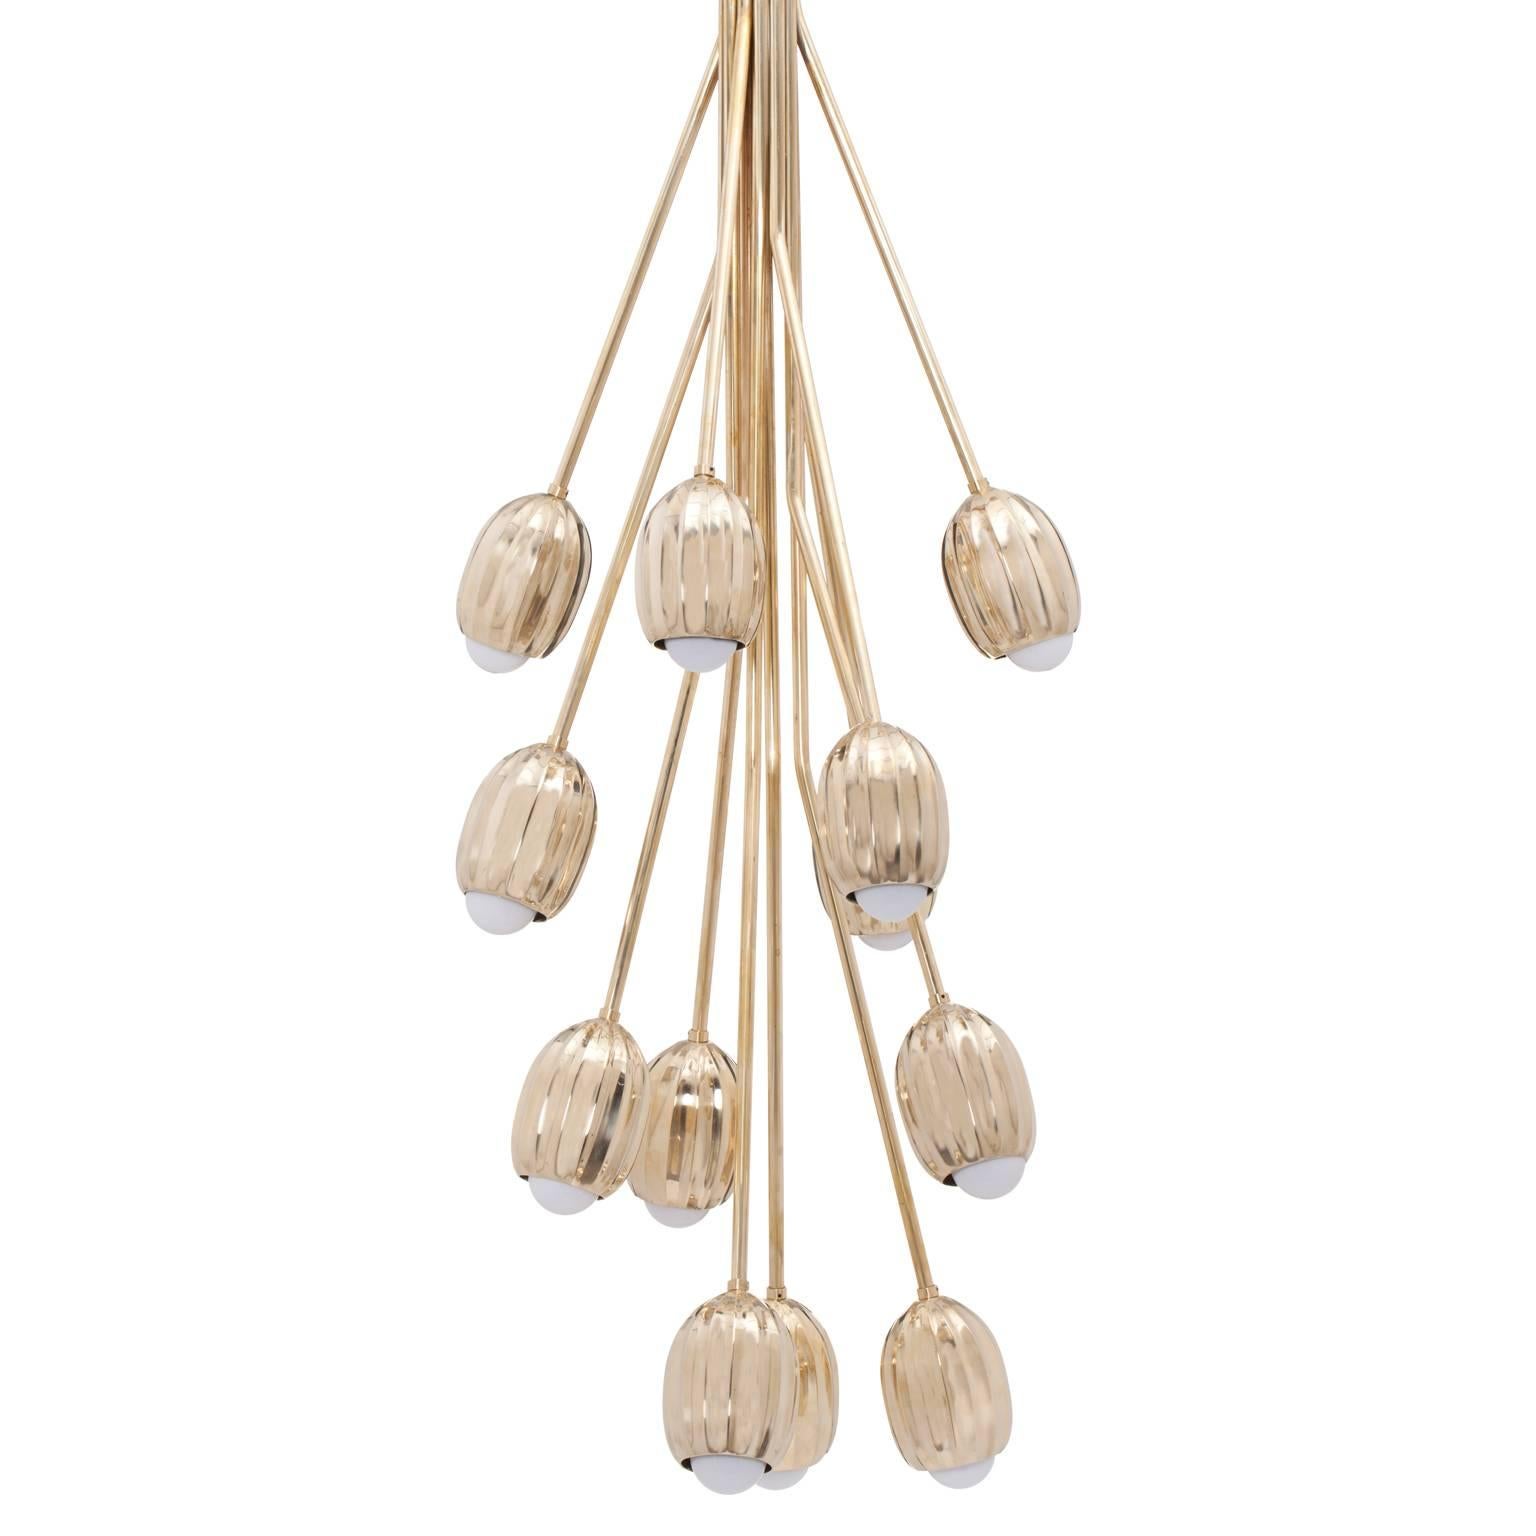 Poppy V. Floral 12-arm Chandelier in Lost Wax Cast Brass